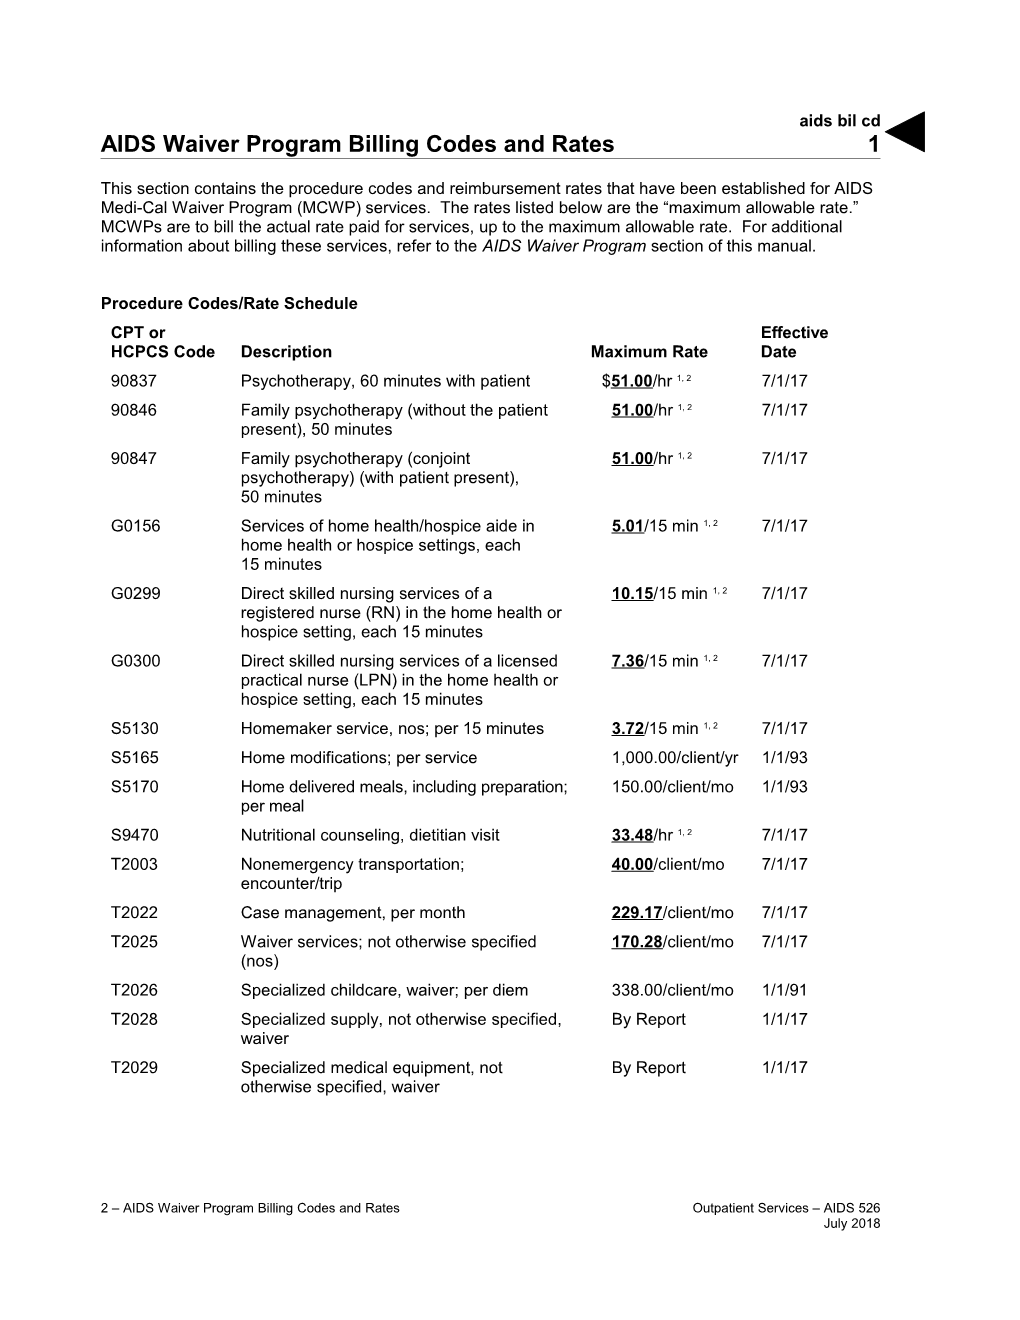 AIDS Waiver Program Billing Codes and Rates (Aids Bil Cd)